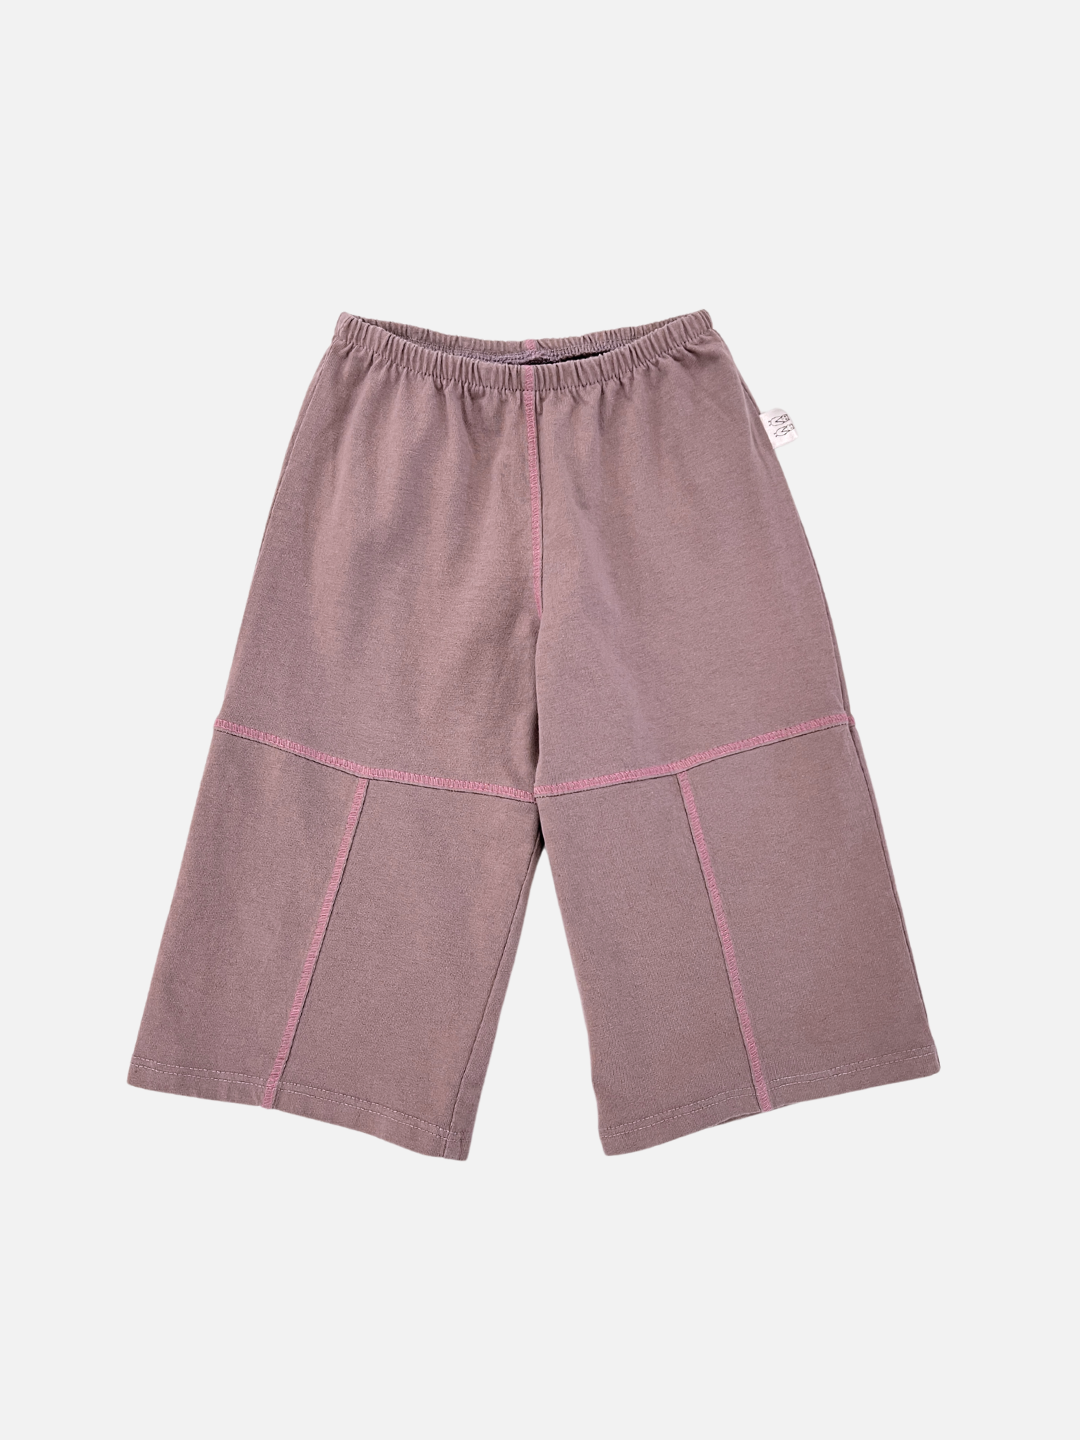 Lavender/Pink |  Front of Lavender/Pink Contrast Stitch Baby Pants. Lavender pant with light pink contrast stitching and an elastic waist.